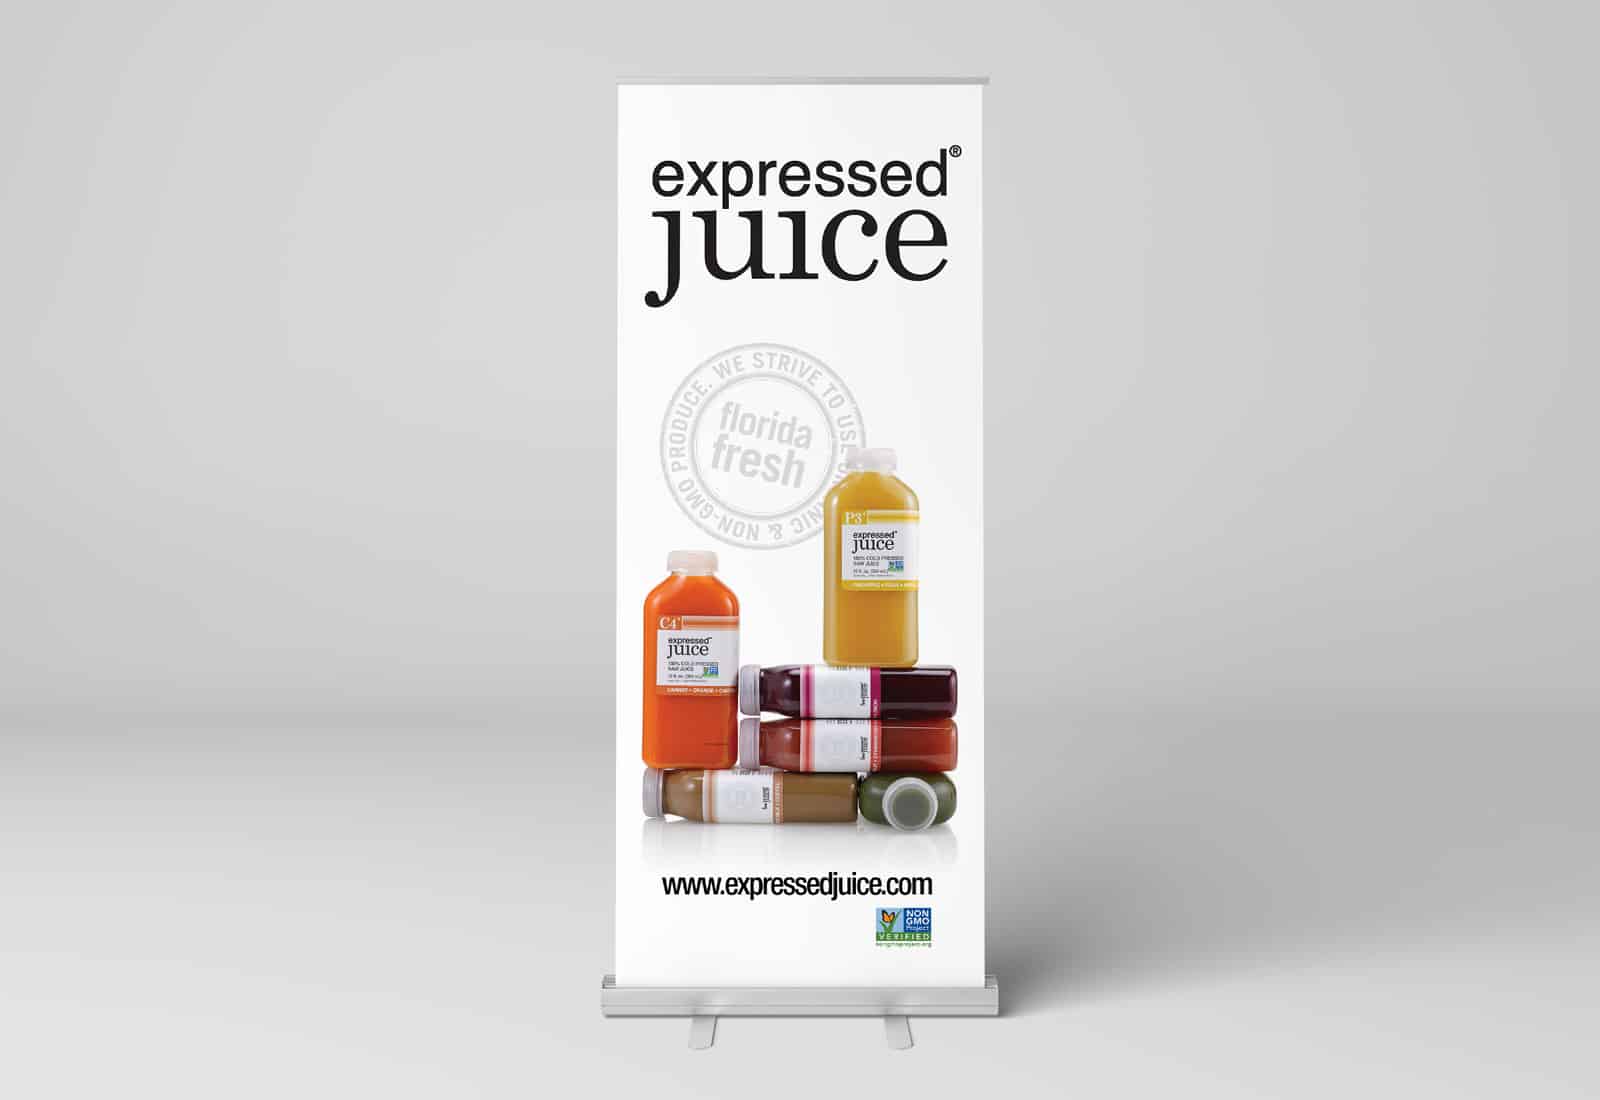 Expressed Juice banner including the logo and stacked configuration of bottles.